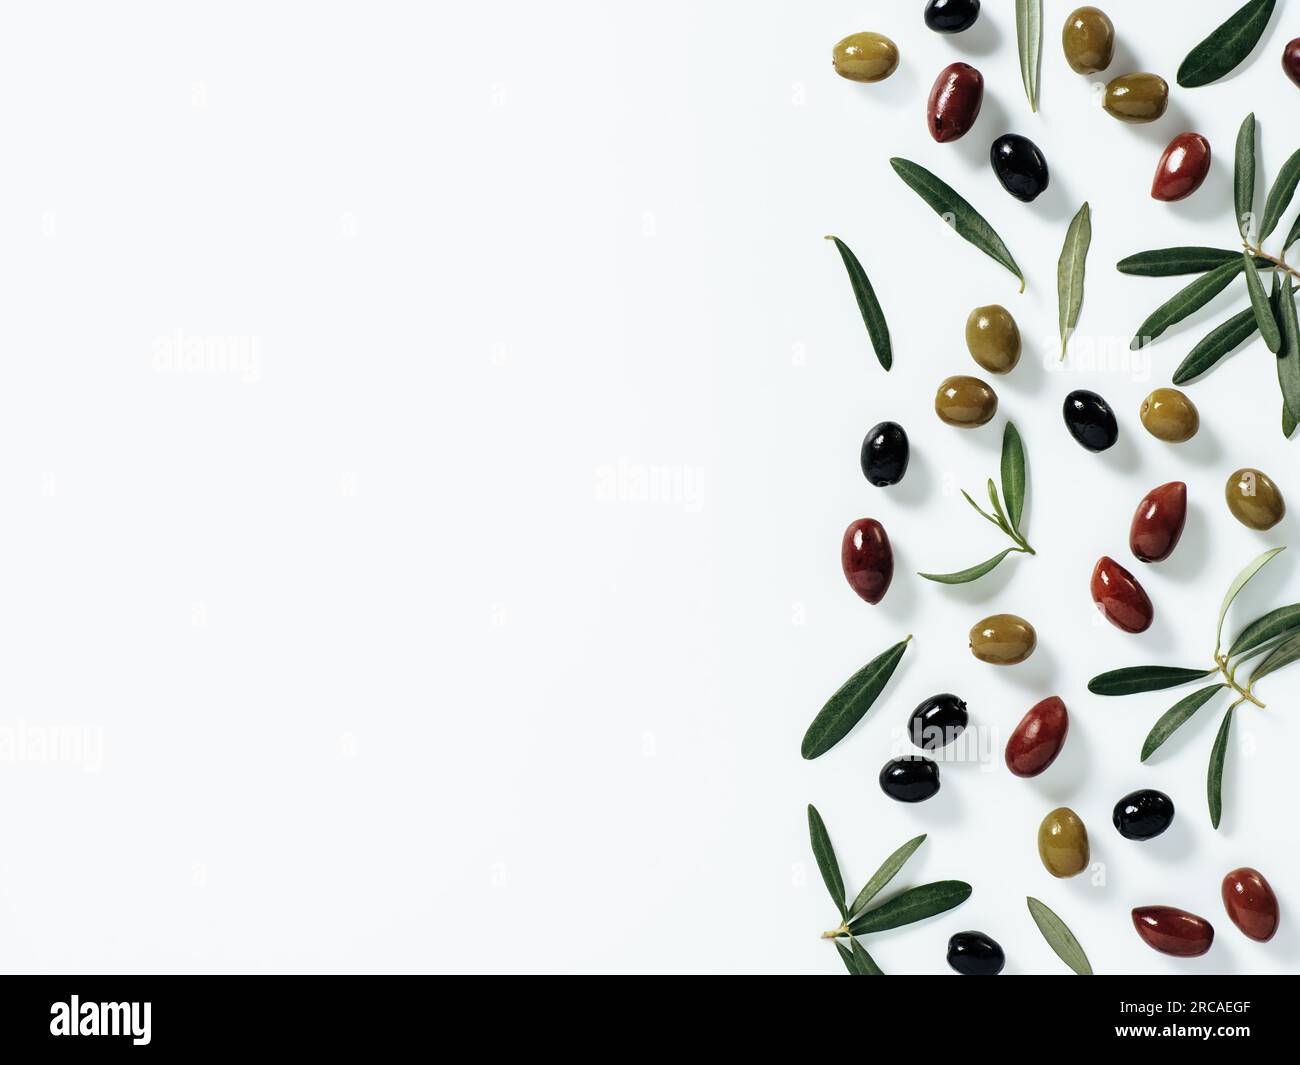 Pattern with green, black and red olives and olives tree leaves and branches on white background. Mix olive tree fruits and branches as background with copy space. Top view or flat lay. Stock Photo